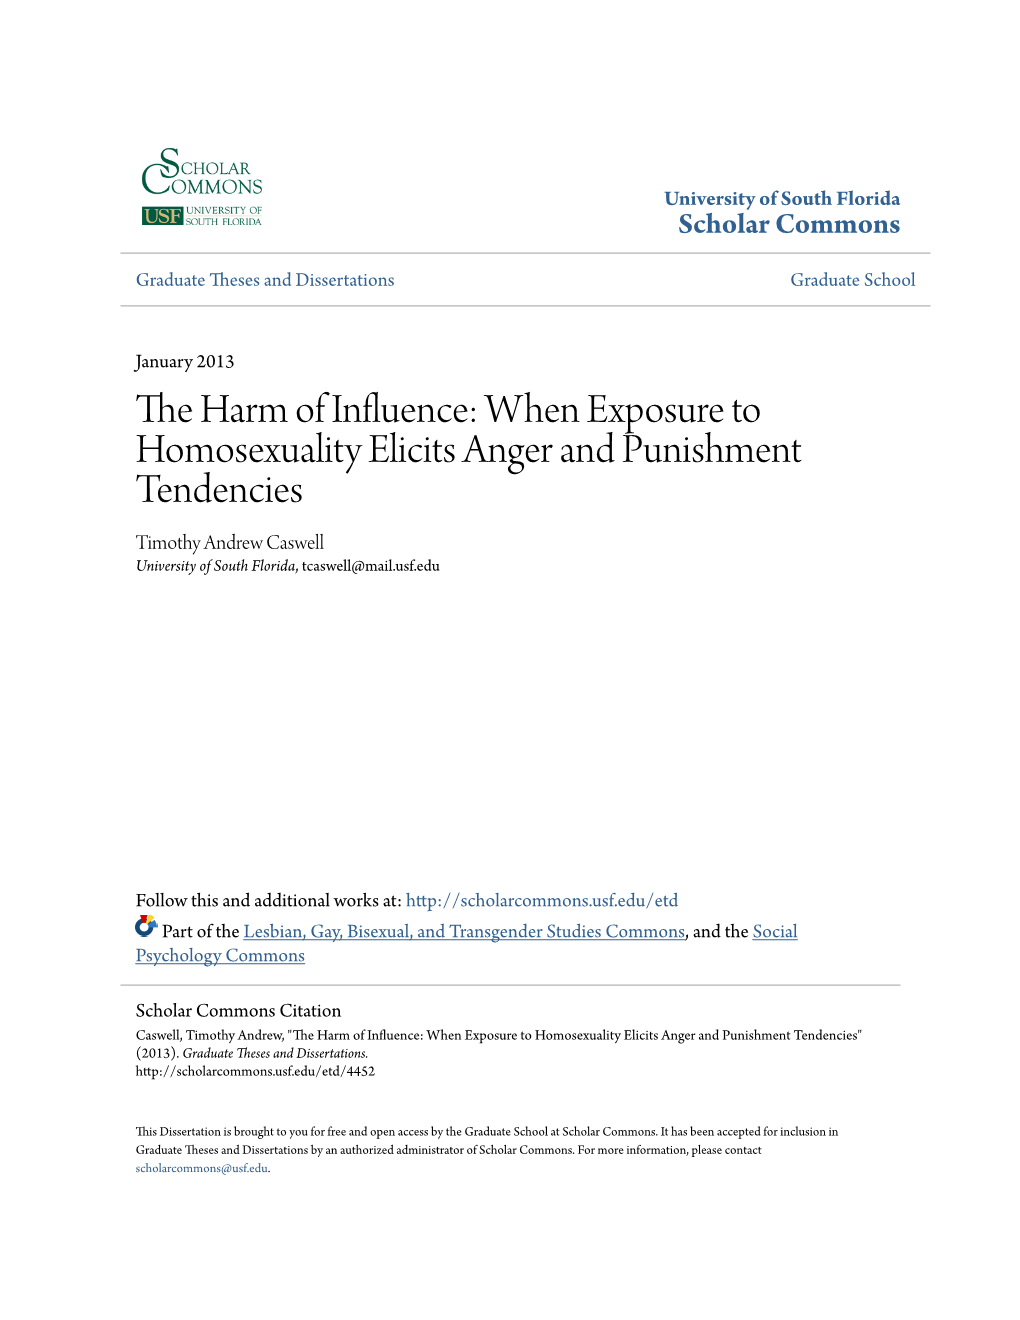 When Exposure to Homosexuality Elicits Anger and Punishment Tendencies Timothy Andrew Caswell University of South Florida, Tcaswell@Mail.Usf.Edu